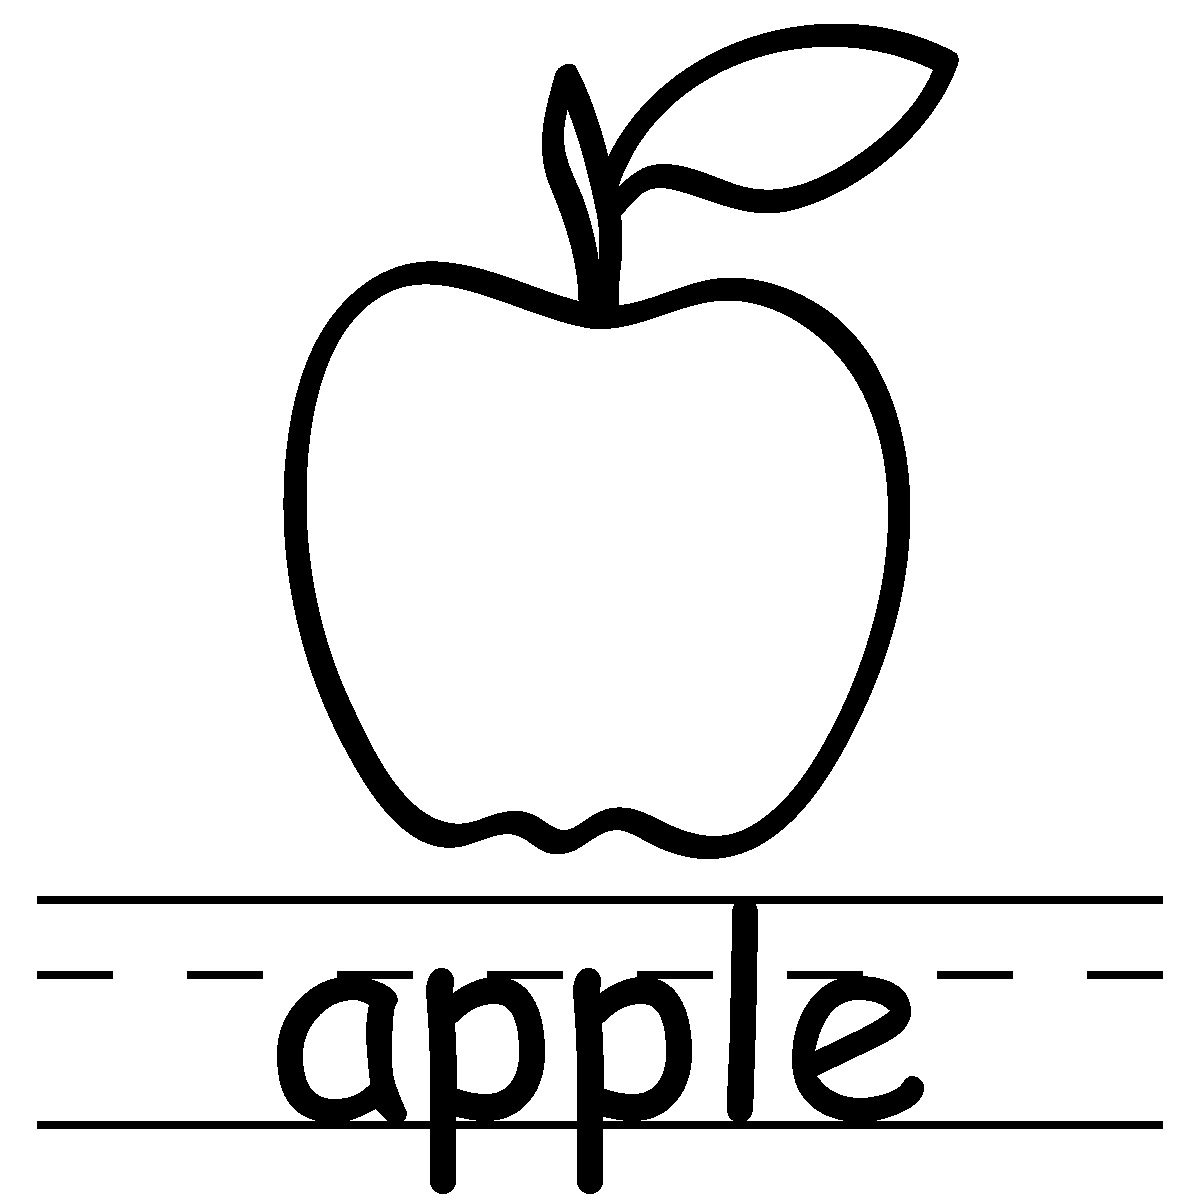 Apple  black and white image of teacher clipart black and white apples